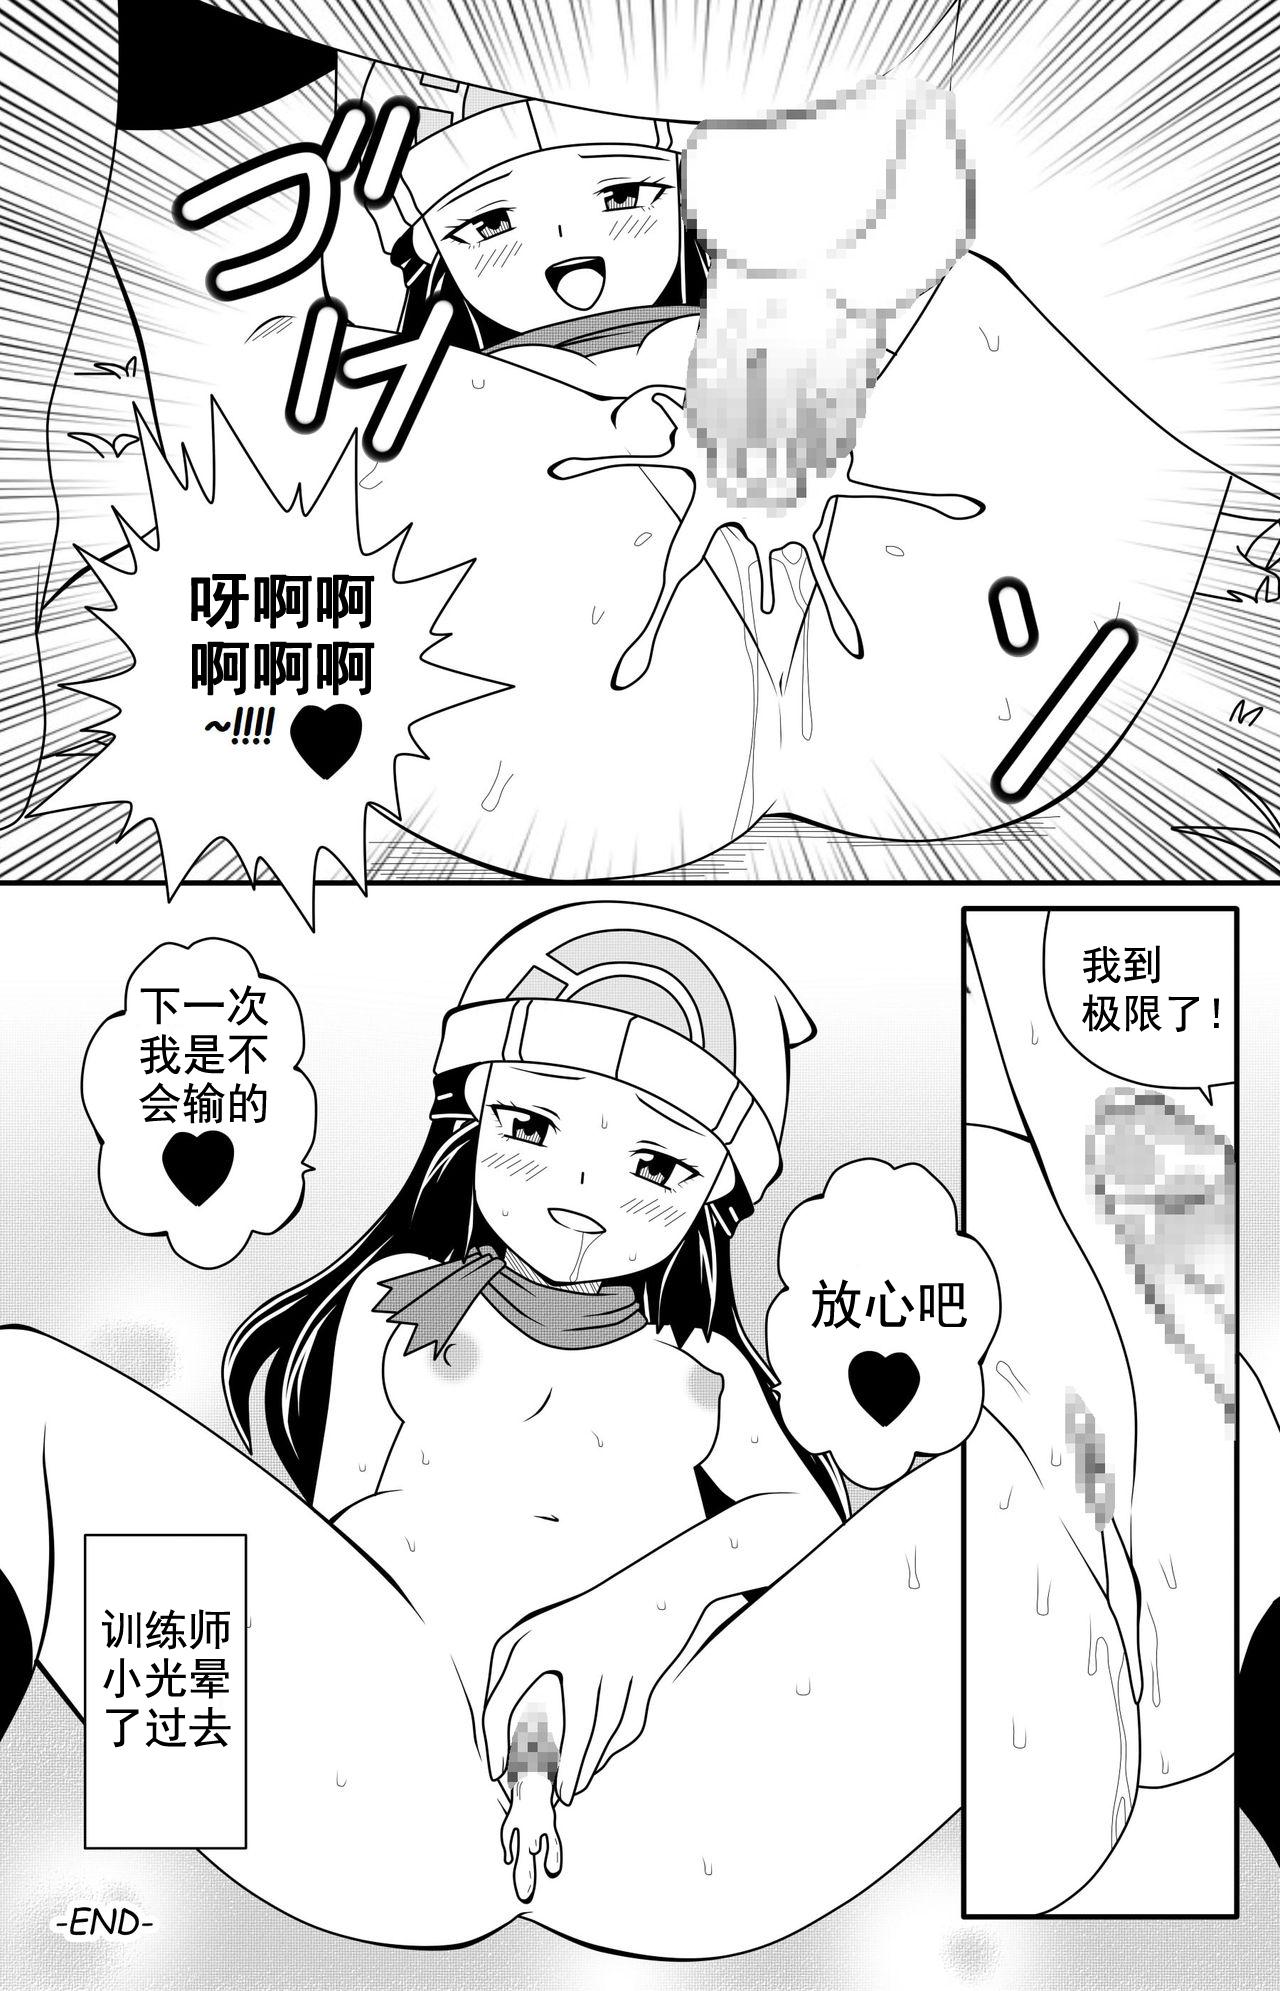 Slapping Pokemon: Breaking Dawn | 宝可梦钻石珍珠 小光本子 - Pokemon | pocket monsters All - Page 17